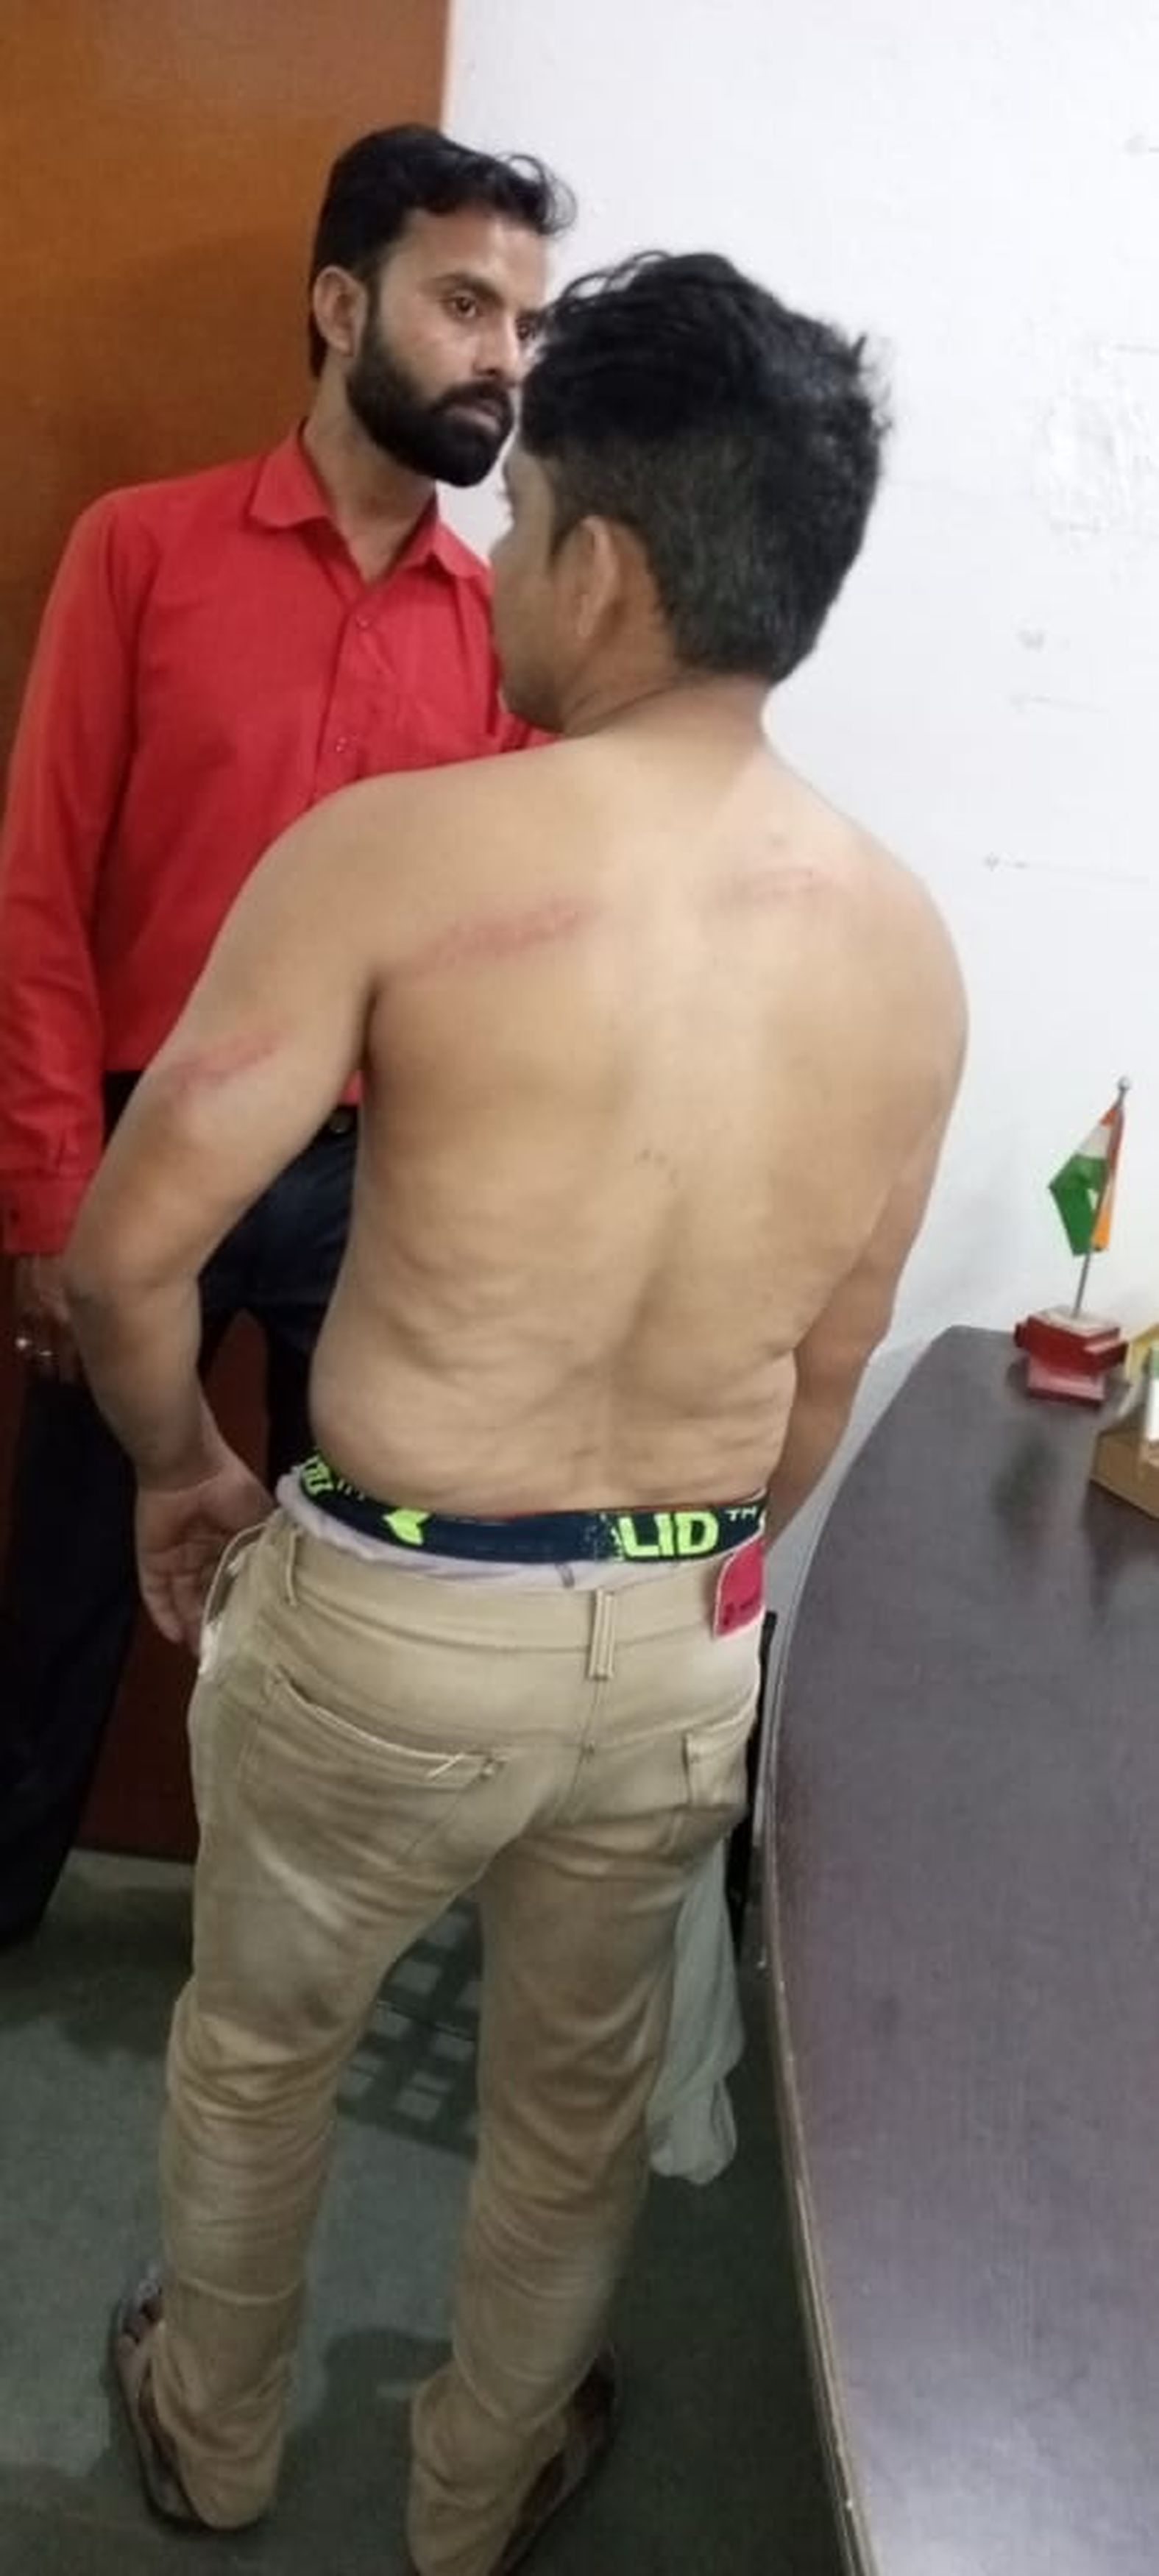 Workers assaulted by sending goons